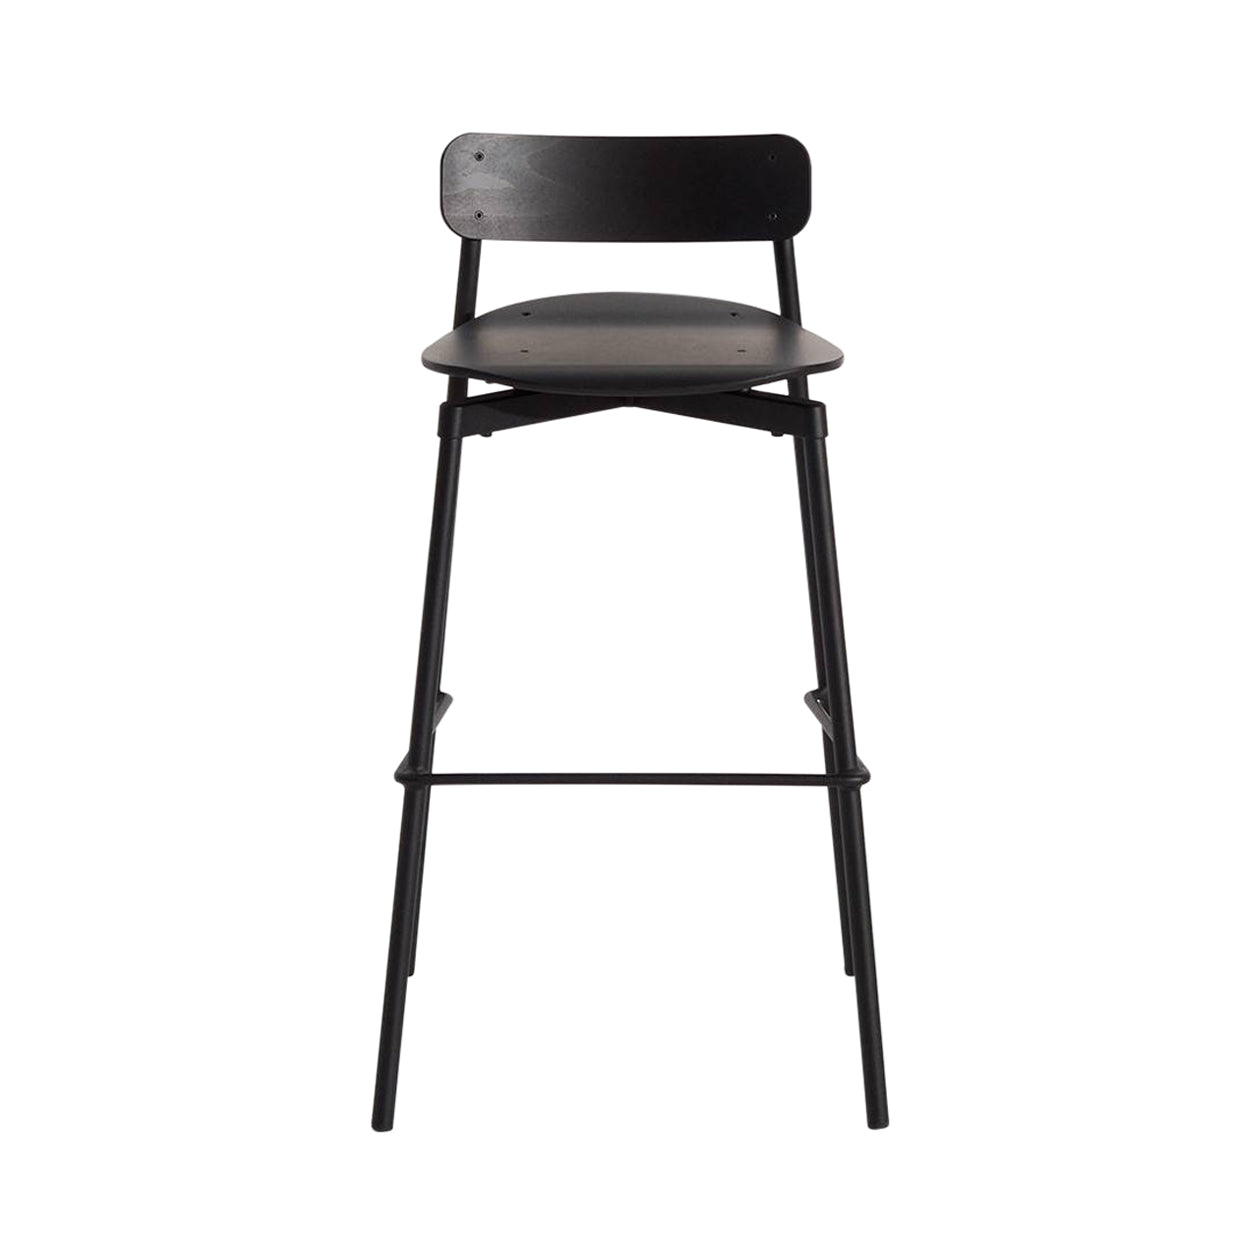 Fromme Bar Stool: Black